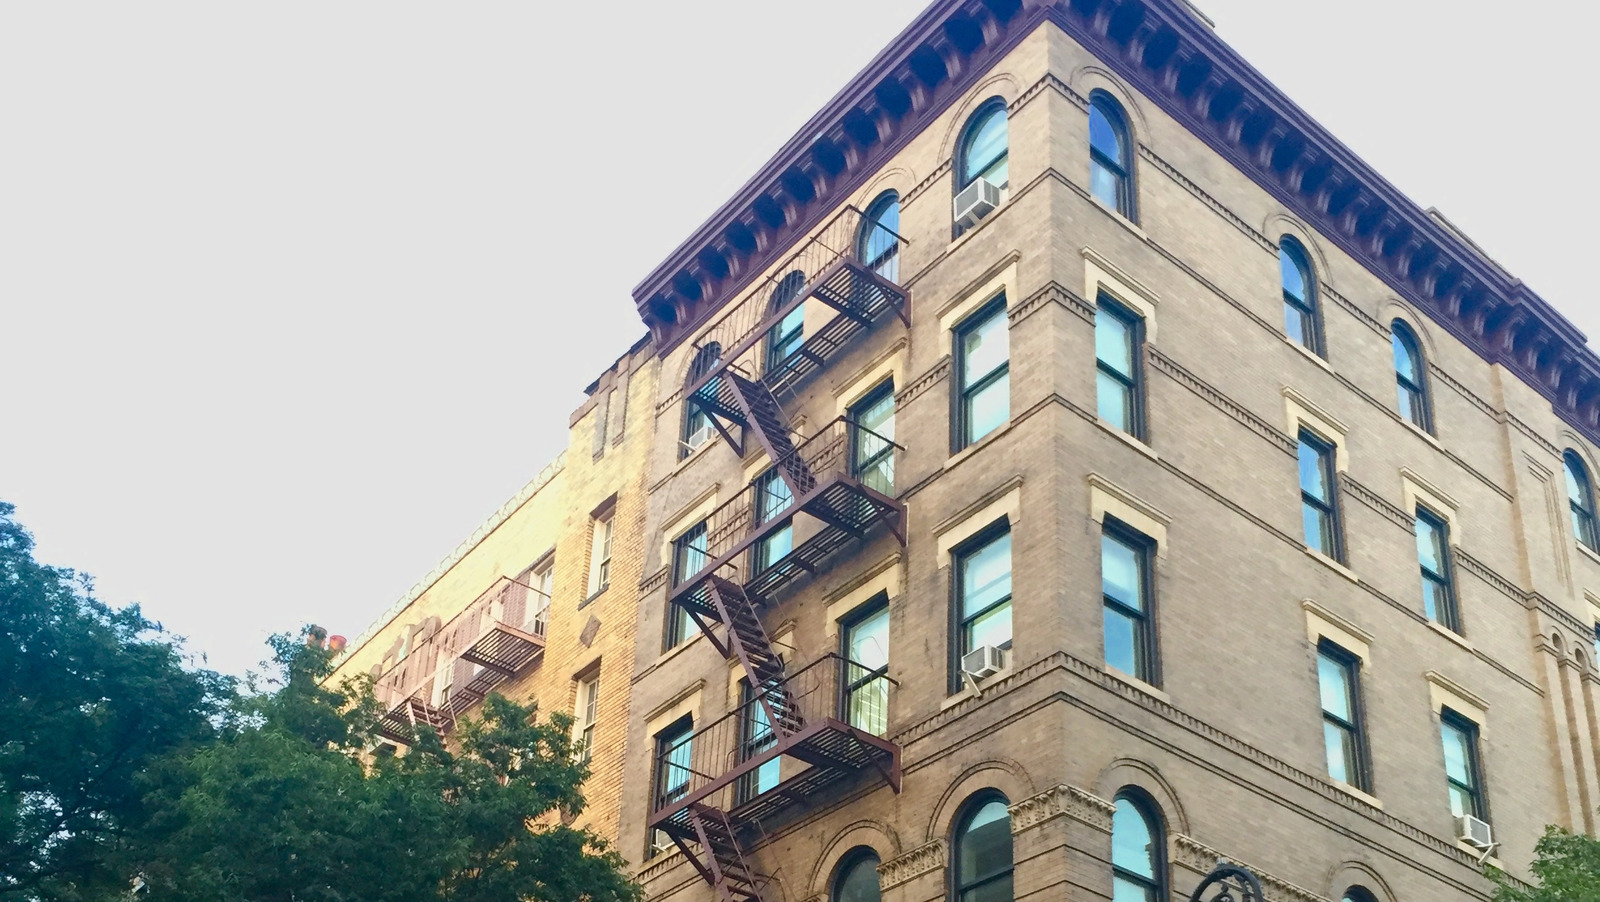 New York, NY - Friends Apartment Building